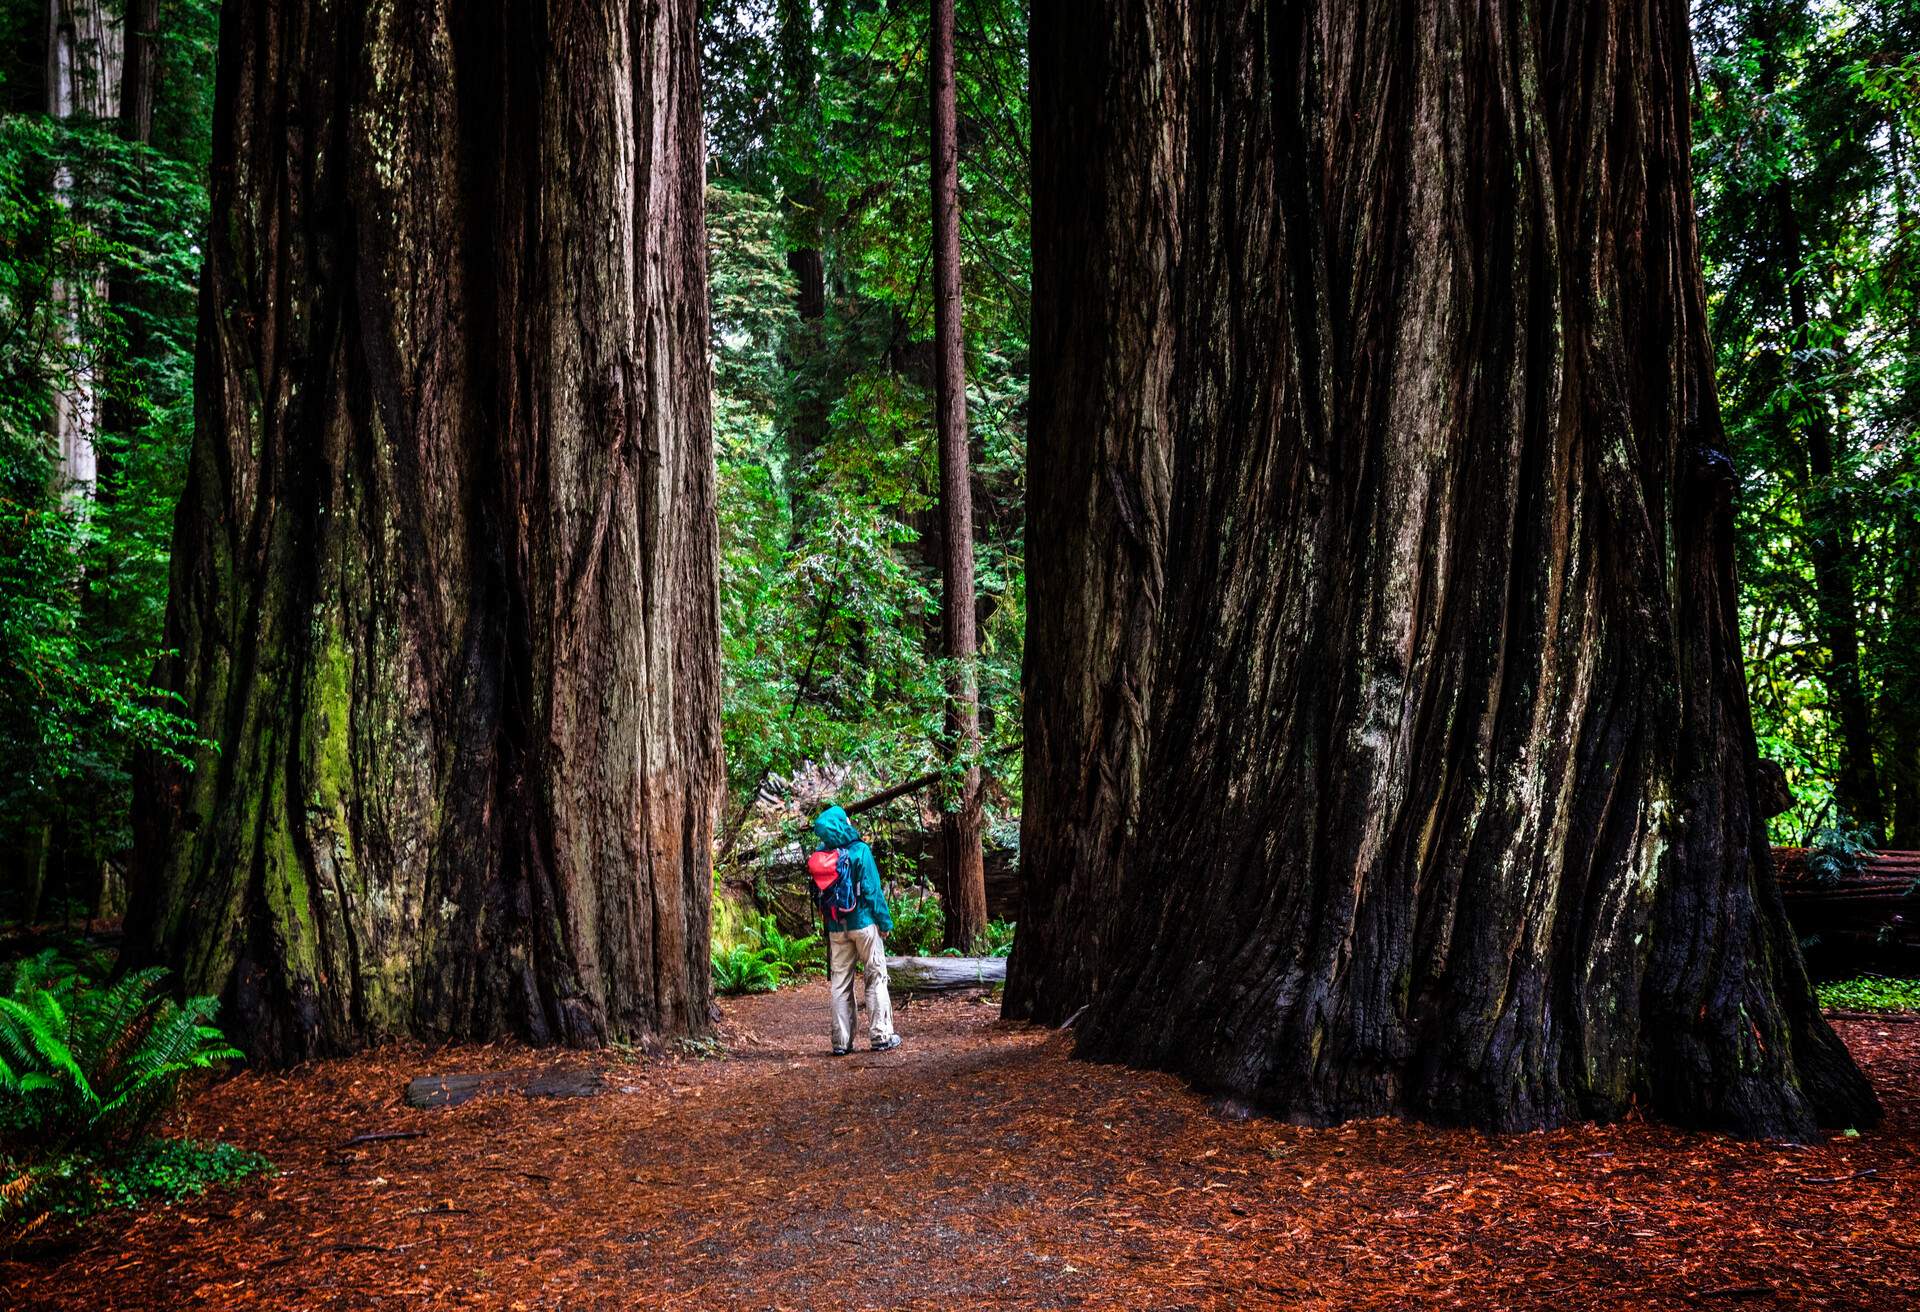 DEST_USA_CALIFORNIA_JEDEDIAH-SMITH_REDWOOD-STATE-PARK_THEME_PEOPLE_TOURIST_ADMIRING_STOUT-GROVE_GettyImages-618618910